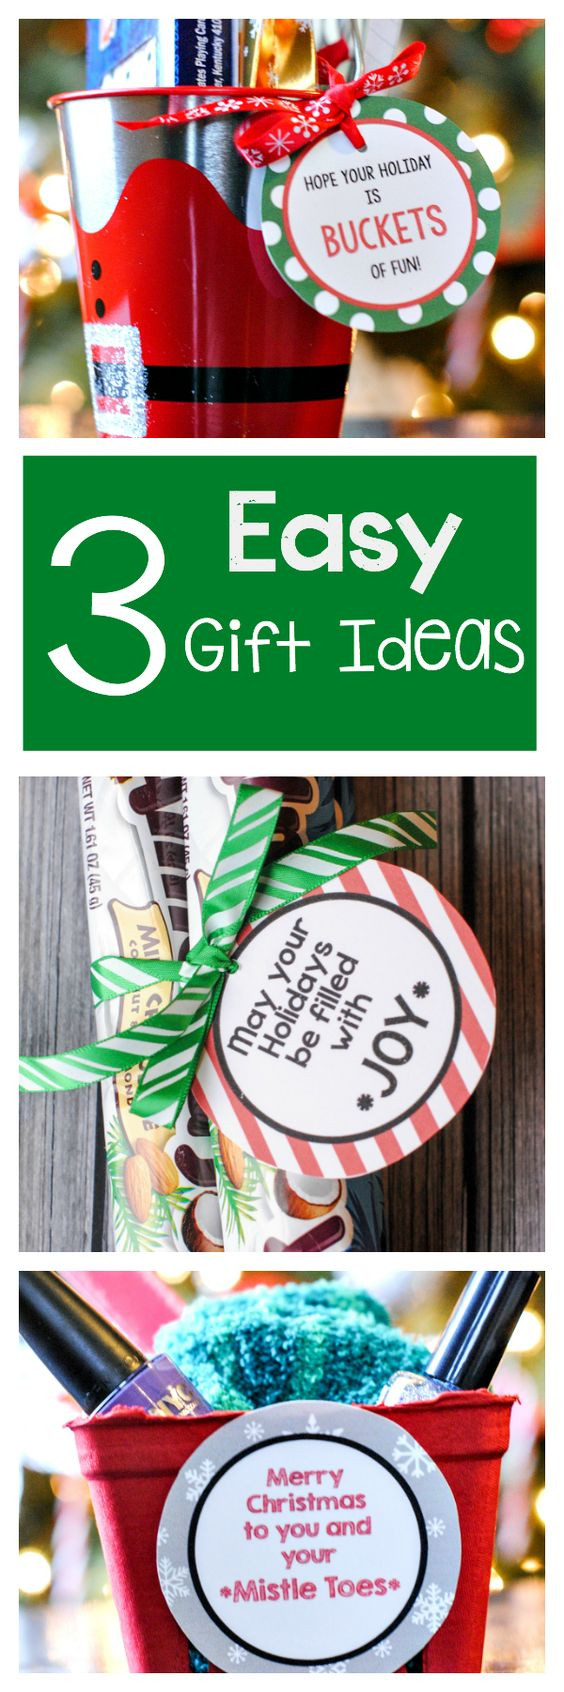 Free Christmas Gift Ideas
 The BEST FREE Christmas Printables – Gift Tags Holiday